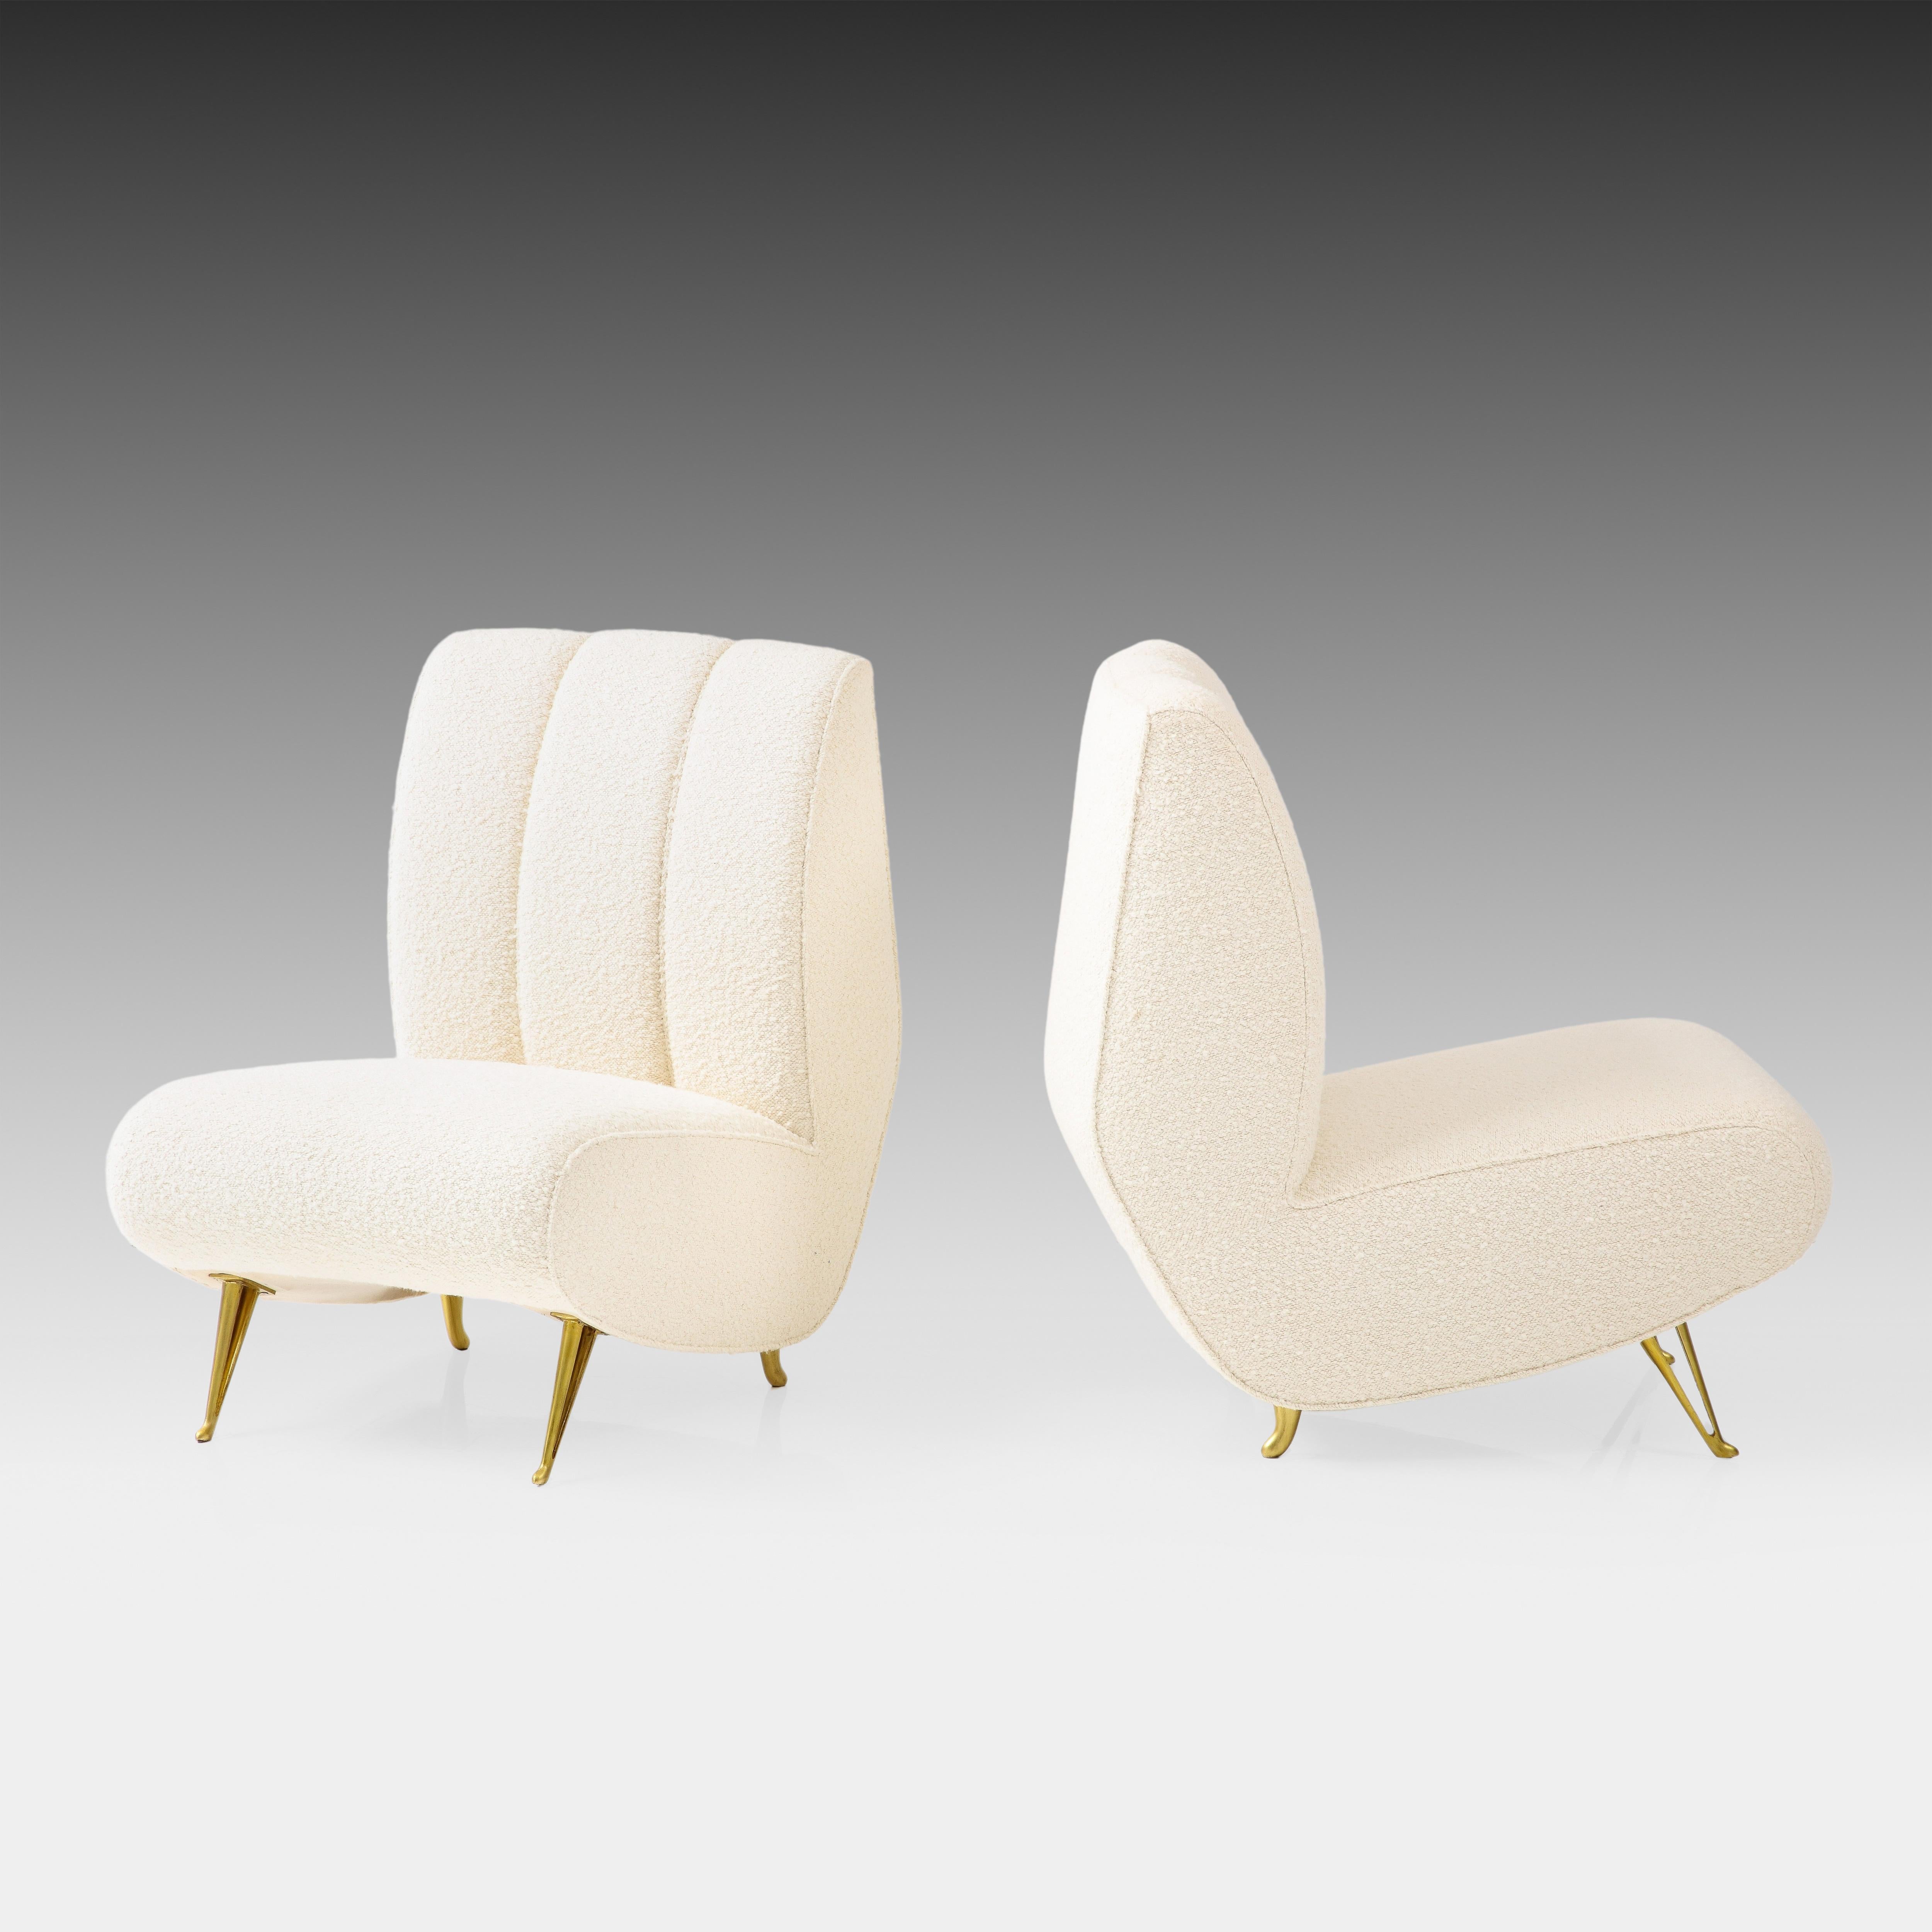 ISA Bergamo Rare Pair of Lounge or Slipper Chairs in Ivory Bouclé, Italy, 1950s In Good Condition For Sale In New York, NY